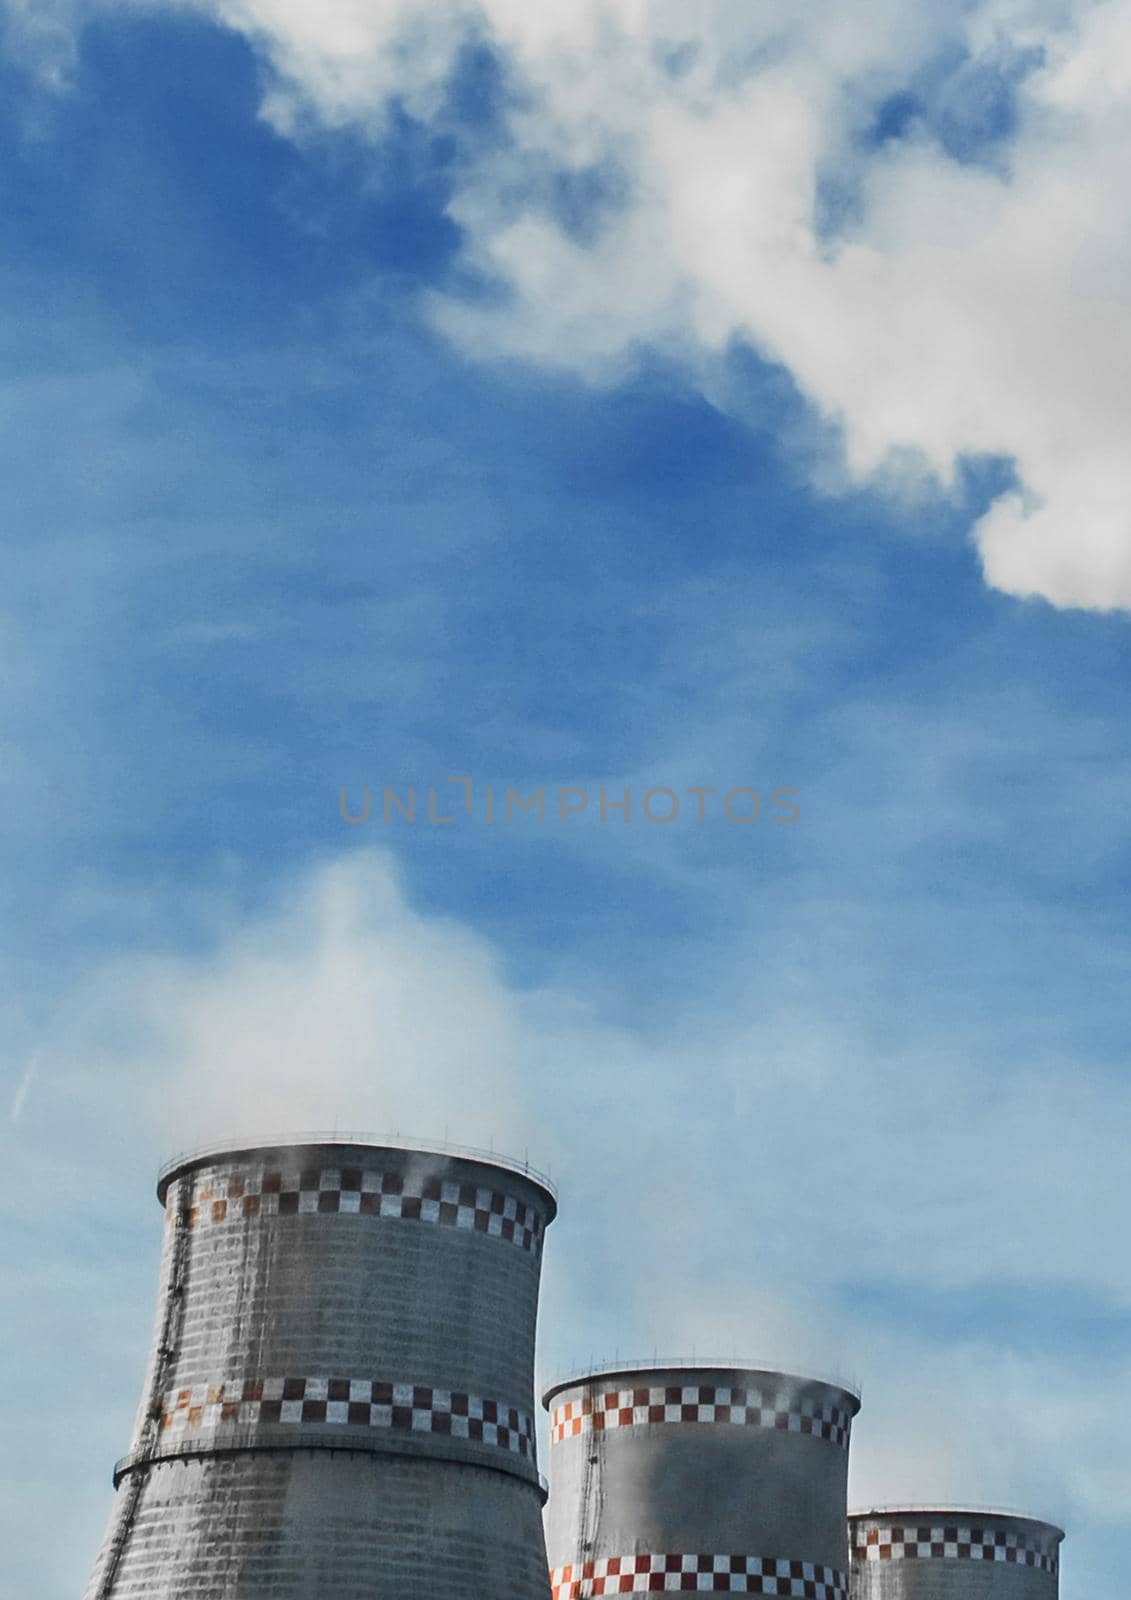 Cooling tower and smoke of an industrial plant or thermal power plant against a blue sky by AYDO8